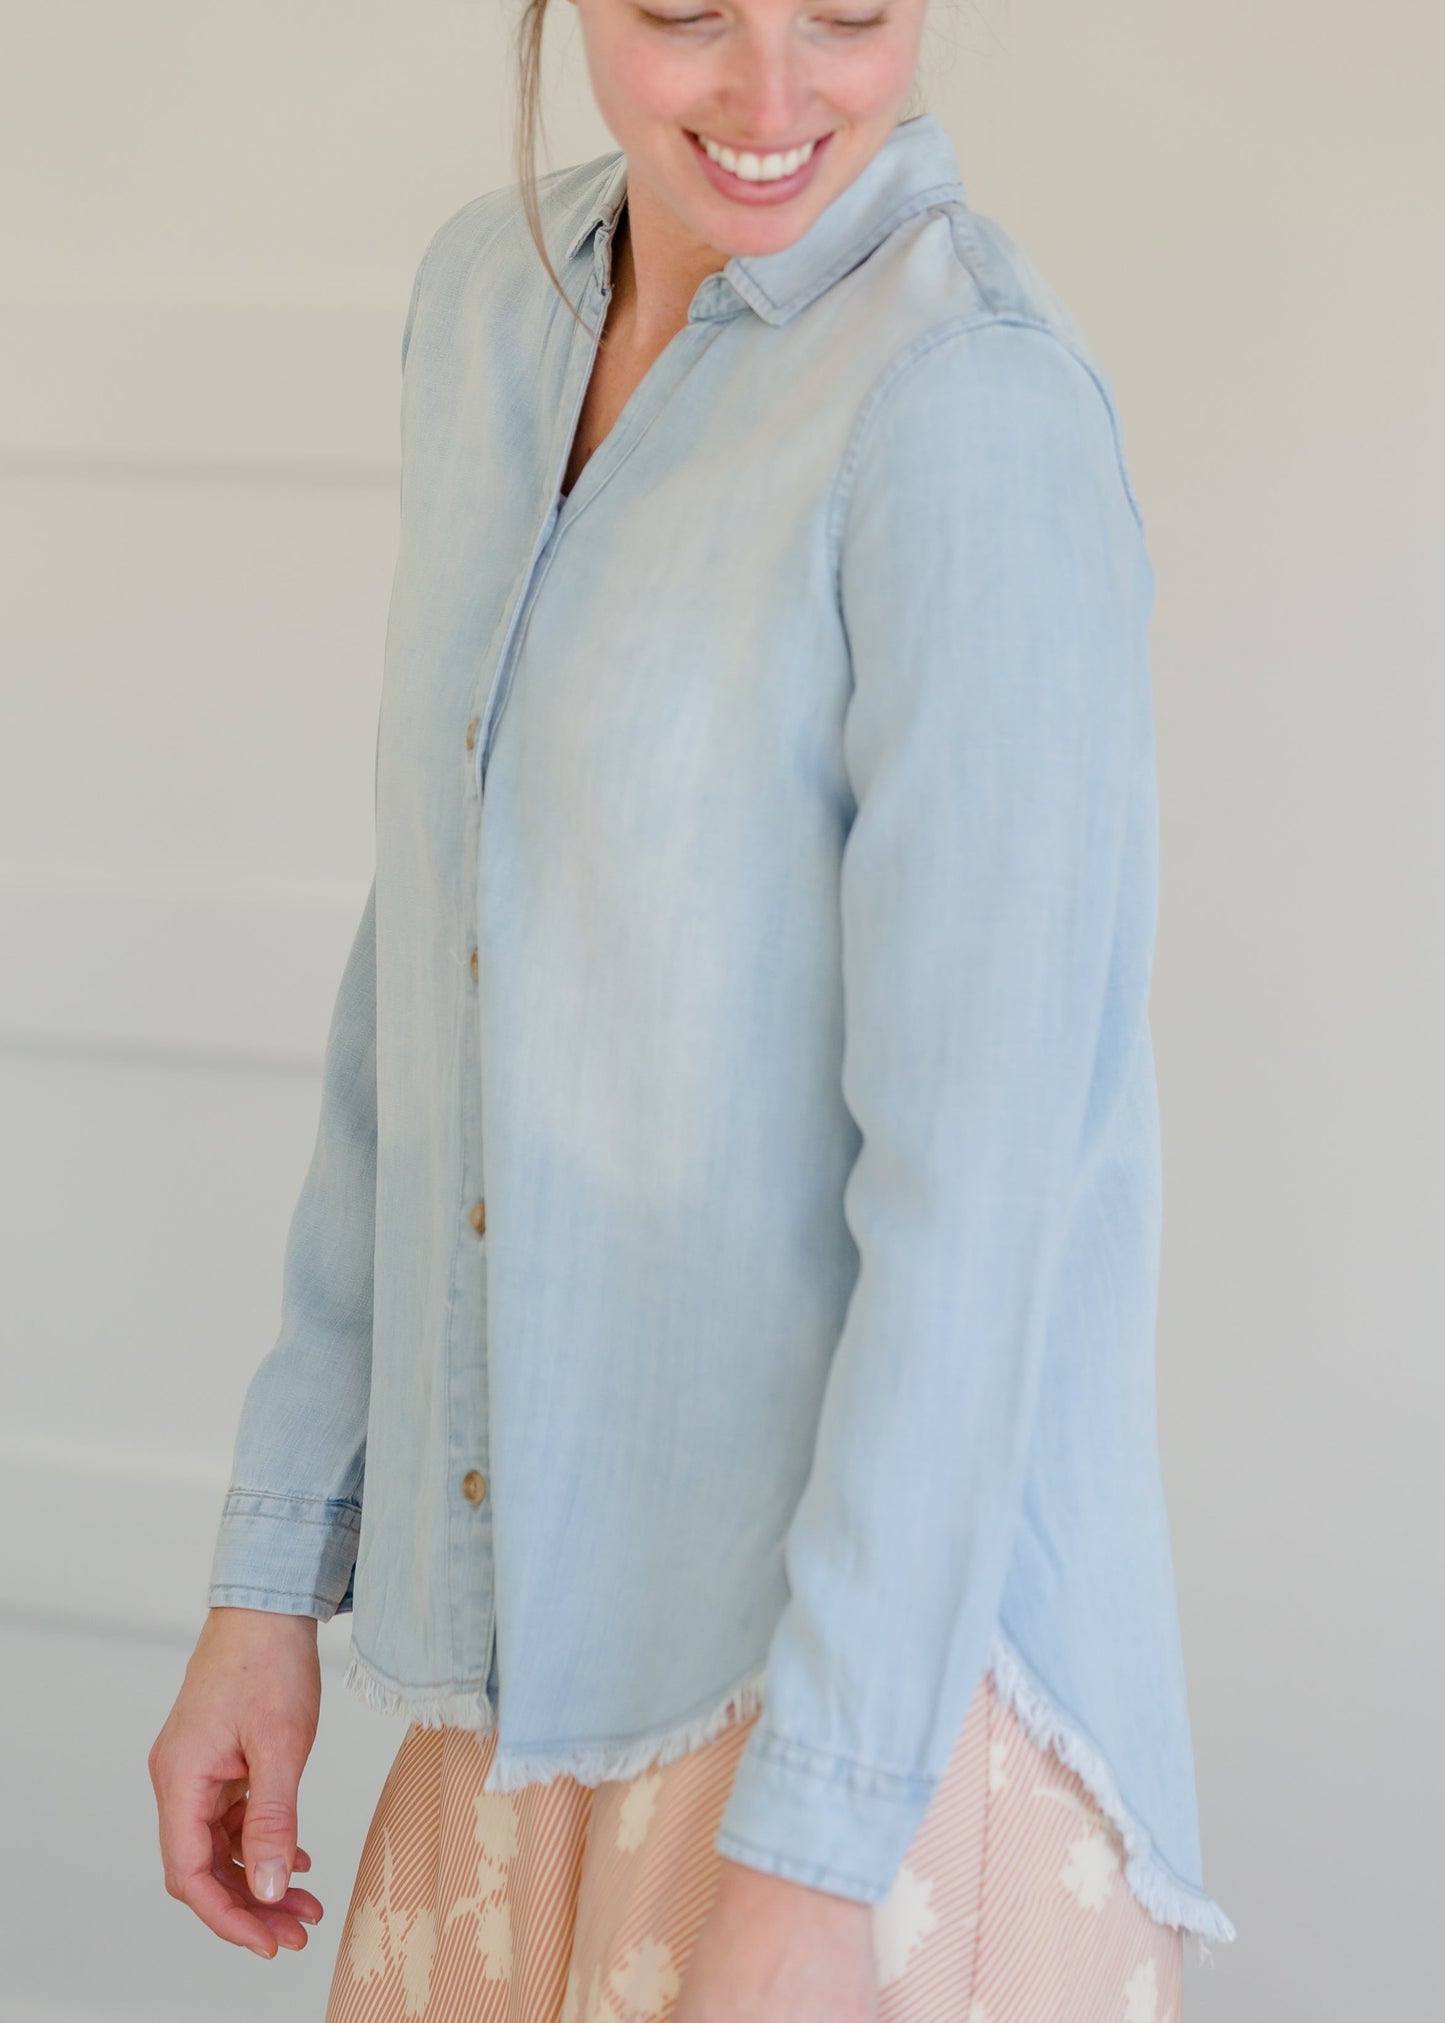 Chambray Fringe Hem Button Up Top - FINAL SALE Tops